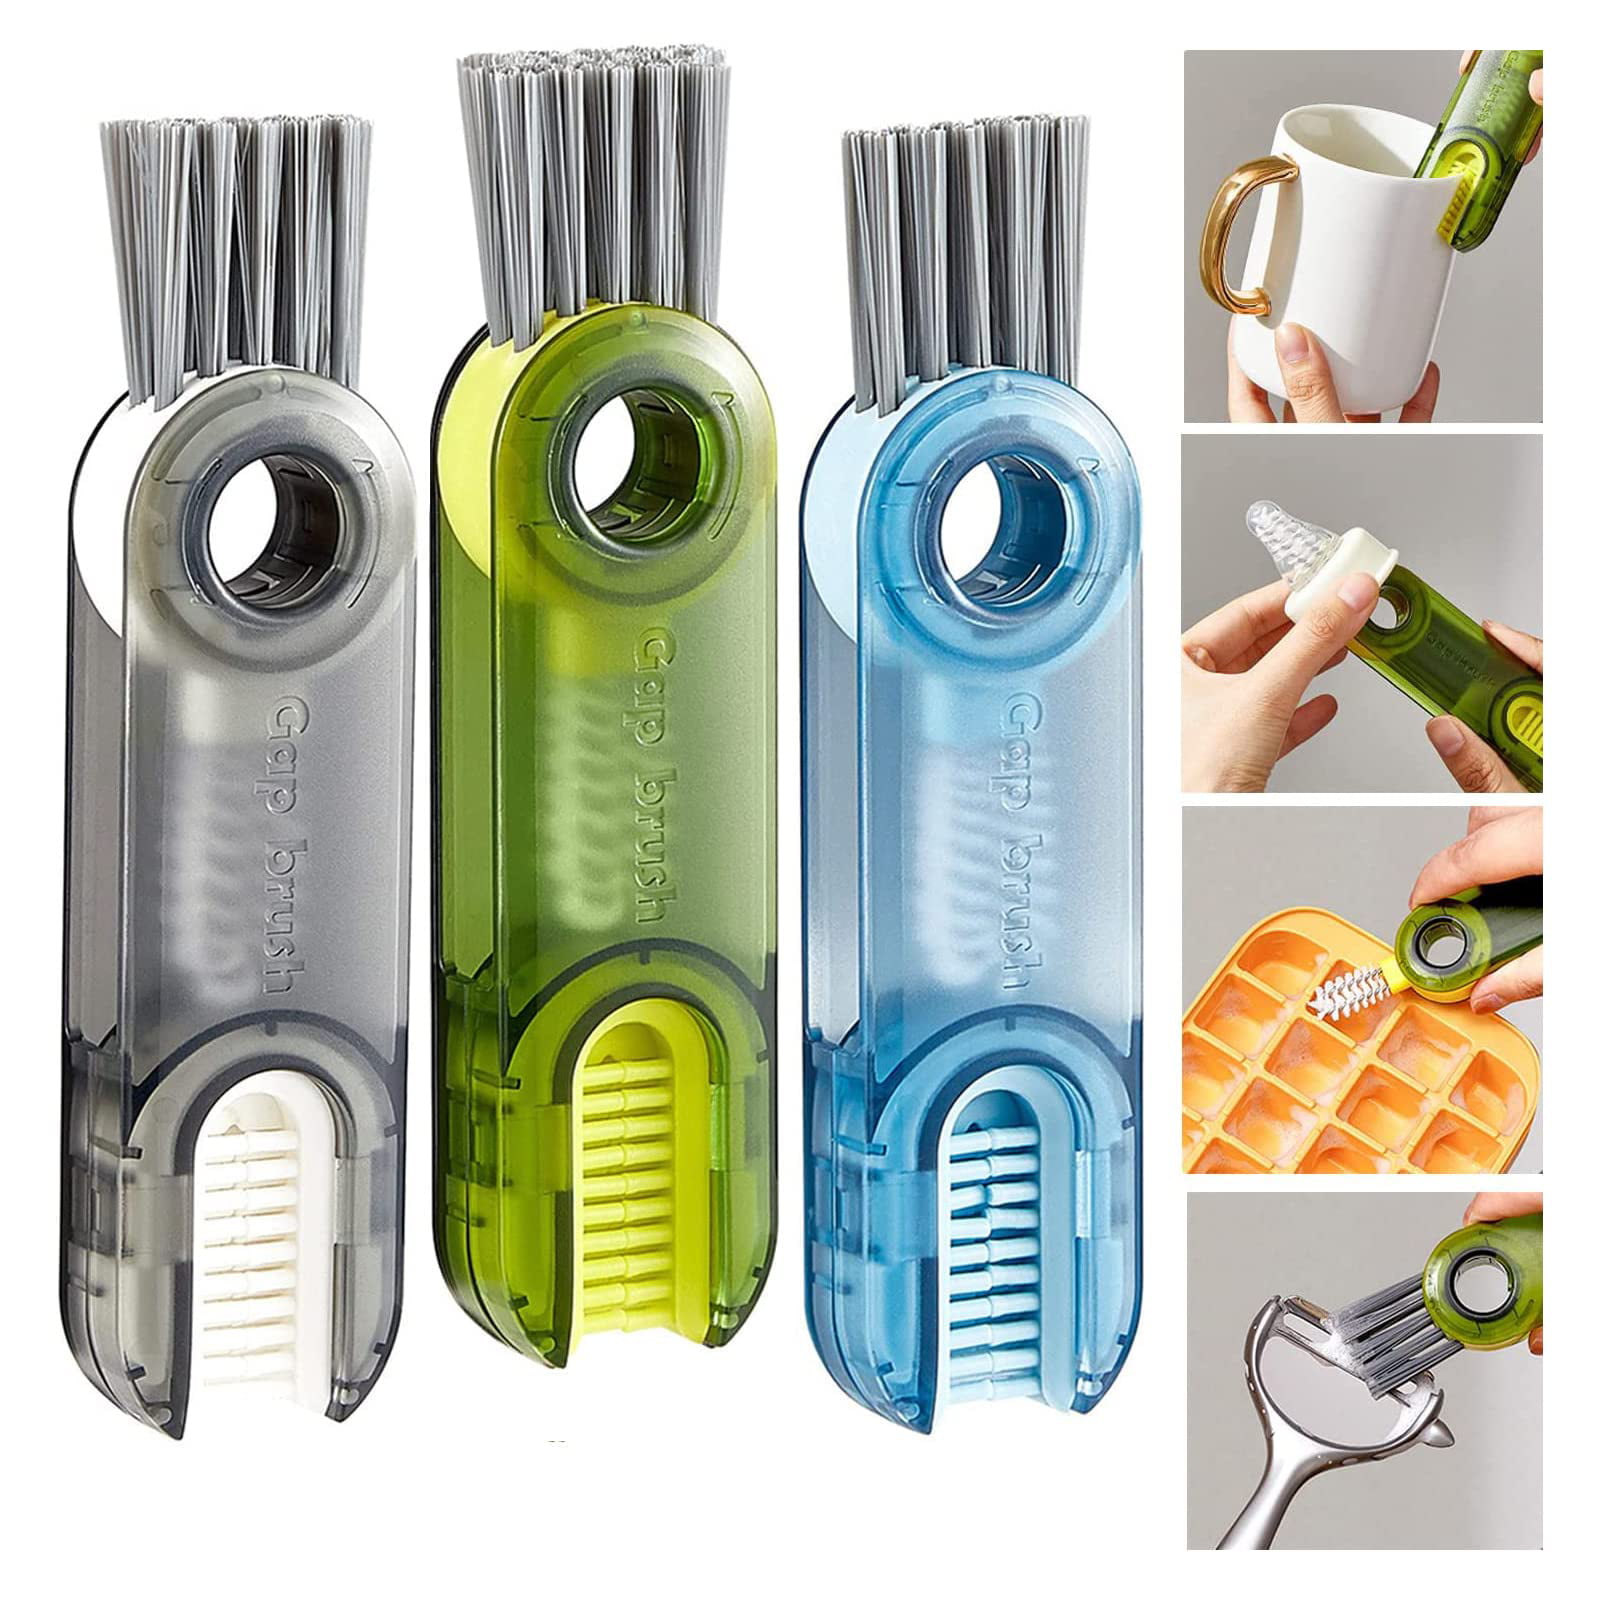 GDSAFS 3 in 1 Multifunctional Cleaning Brush, 3 in 1 Tiny Bottle